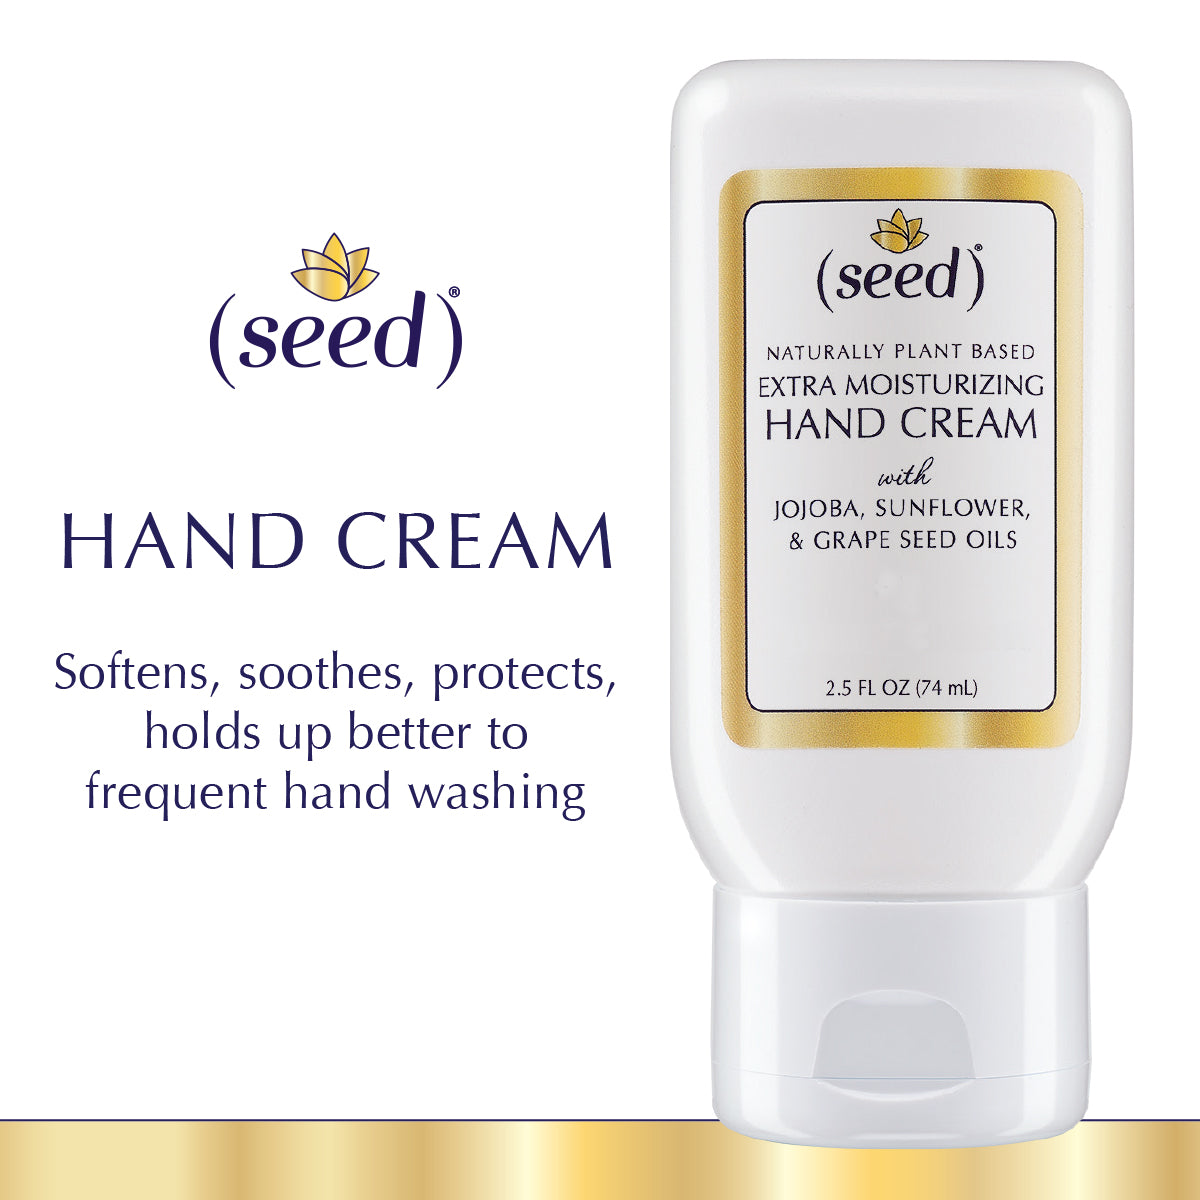 Seed Extra Moisturizing Hand Cream, formerly known as Seed Healthy Hand Cream